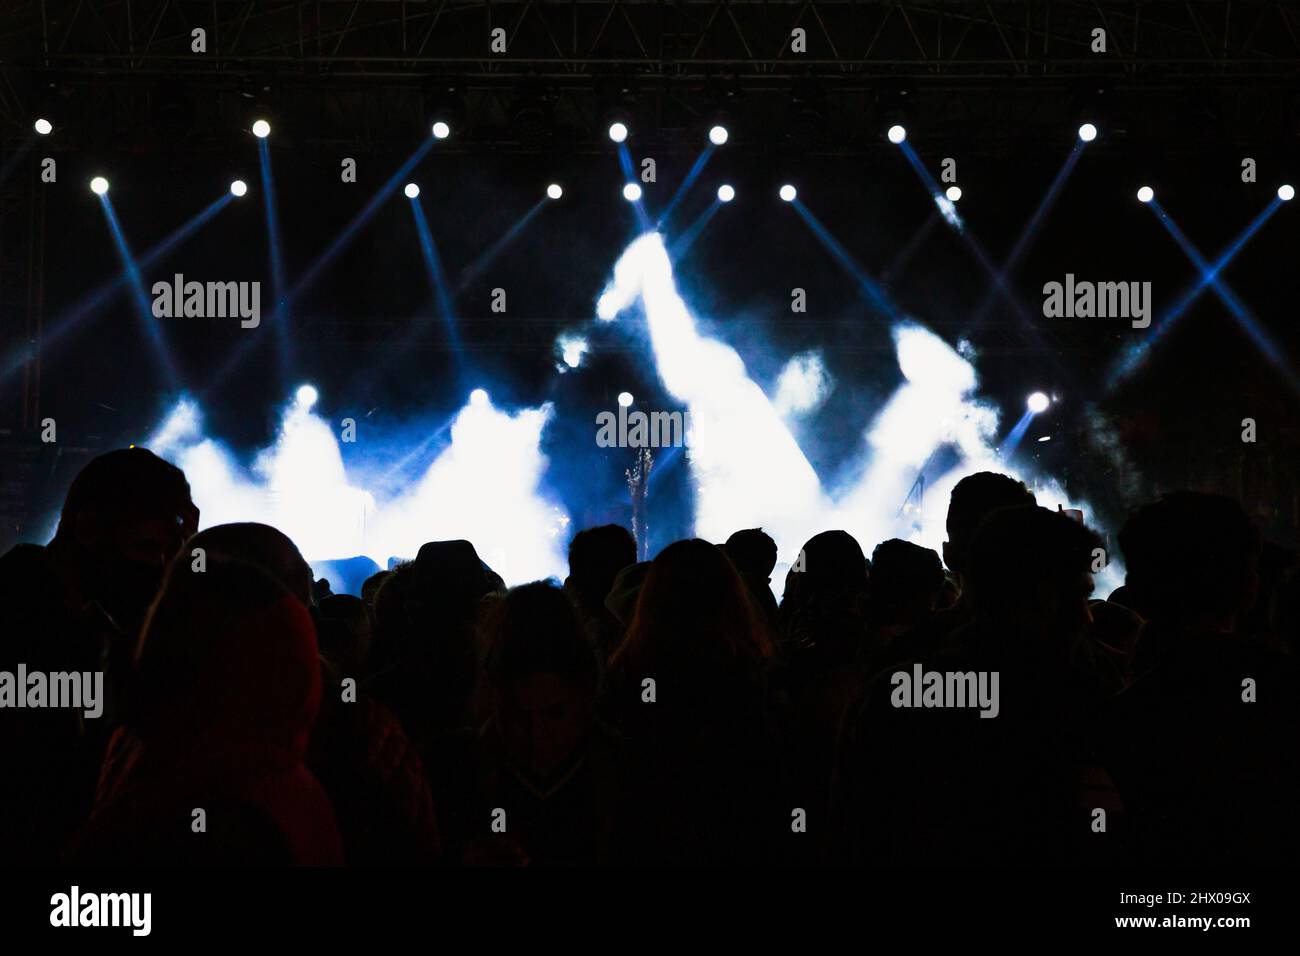 Silhouette of crowd in a concert. Spotlights on the stage. Musical performance background photo. Noise included. Stock Photo